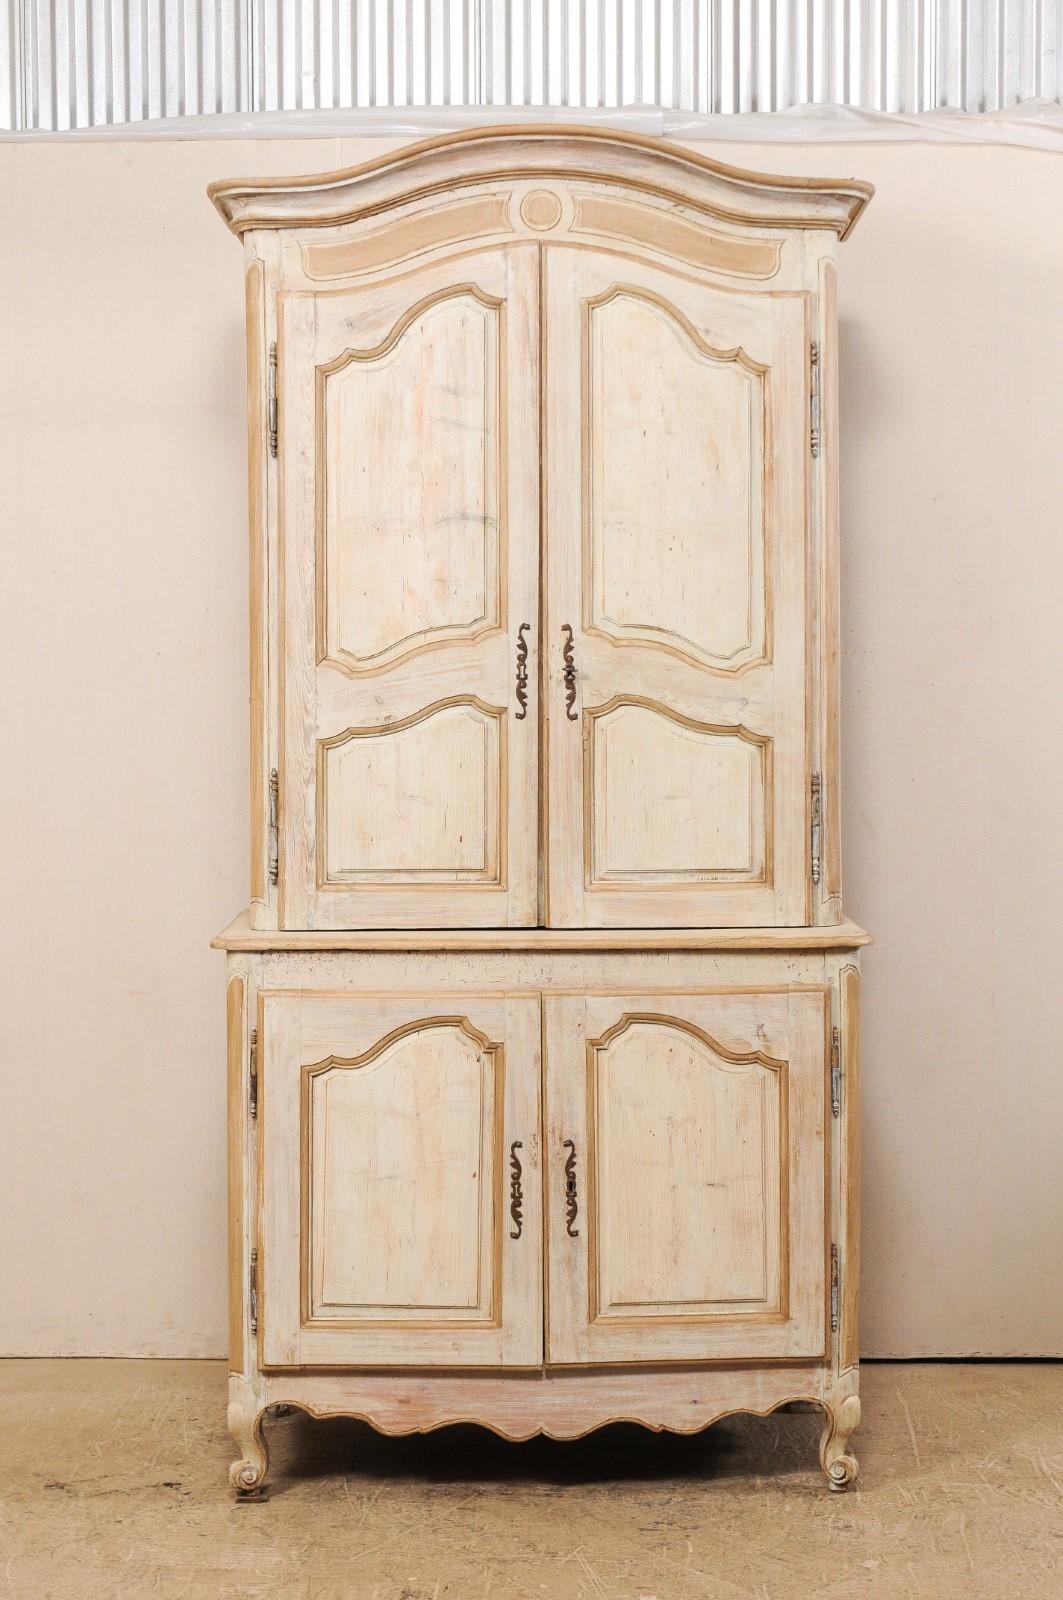 A tall French painted wood storage cabinet from the turn of the 18th and 19th century. This tall French antique cabinet features a delicately arched and molded center top pediment, carved, rounded side posts, a scalloped skirt along three sides, and